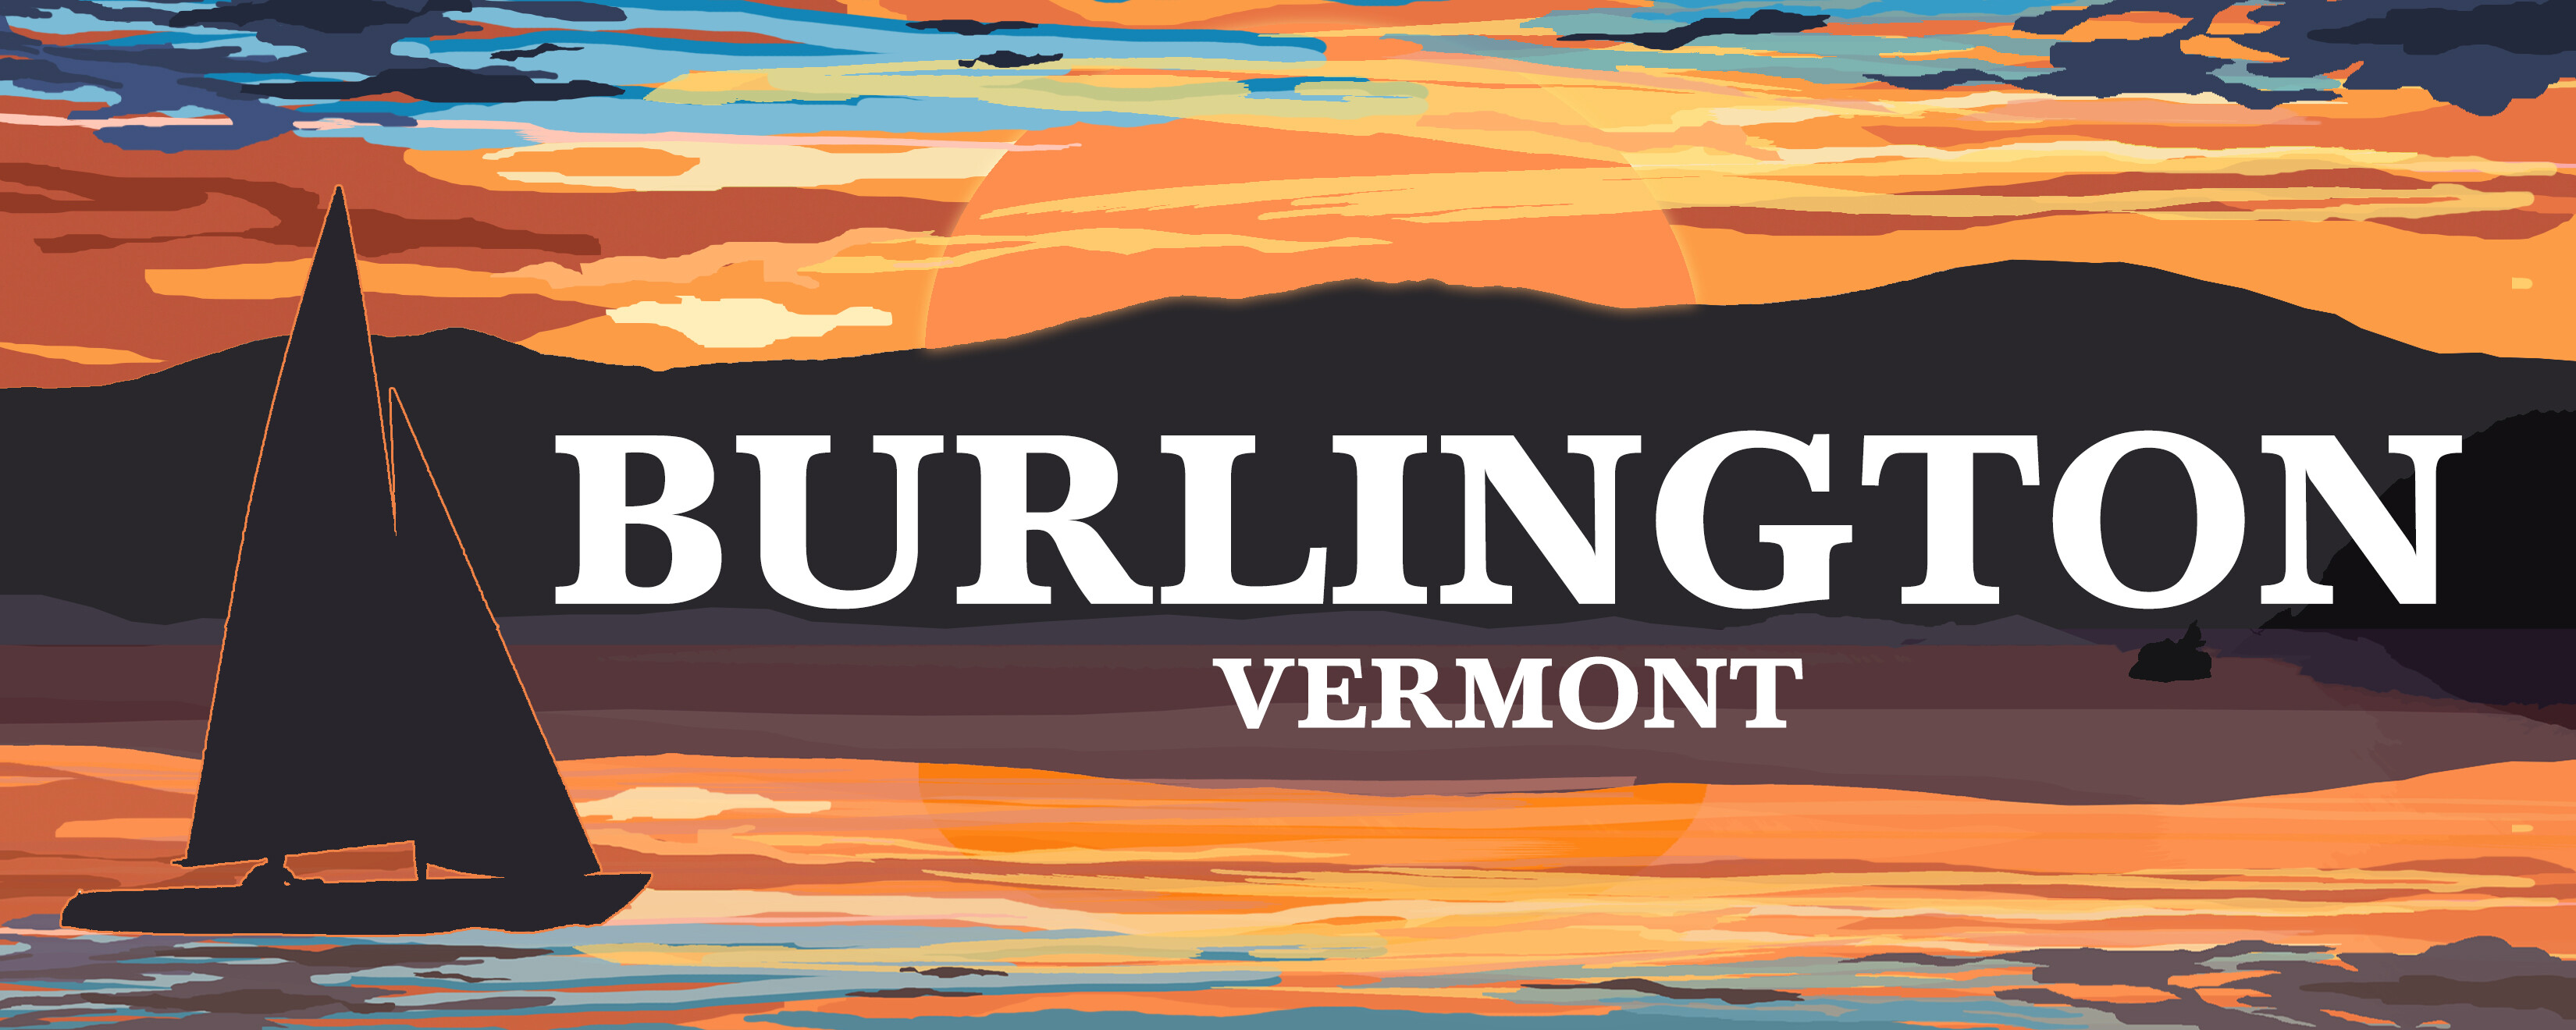 All Things Vermont